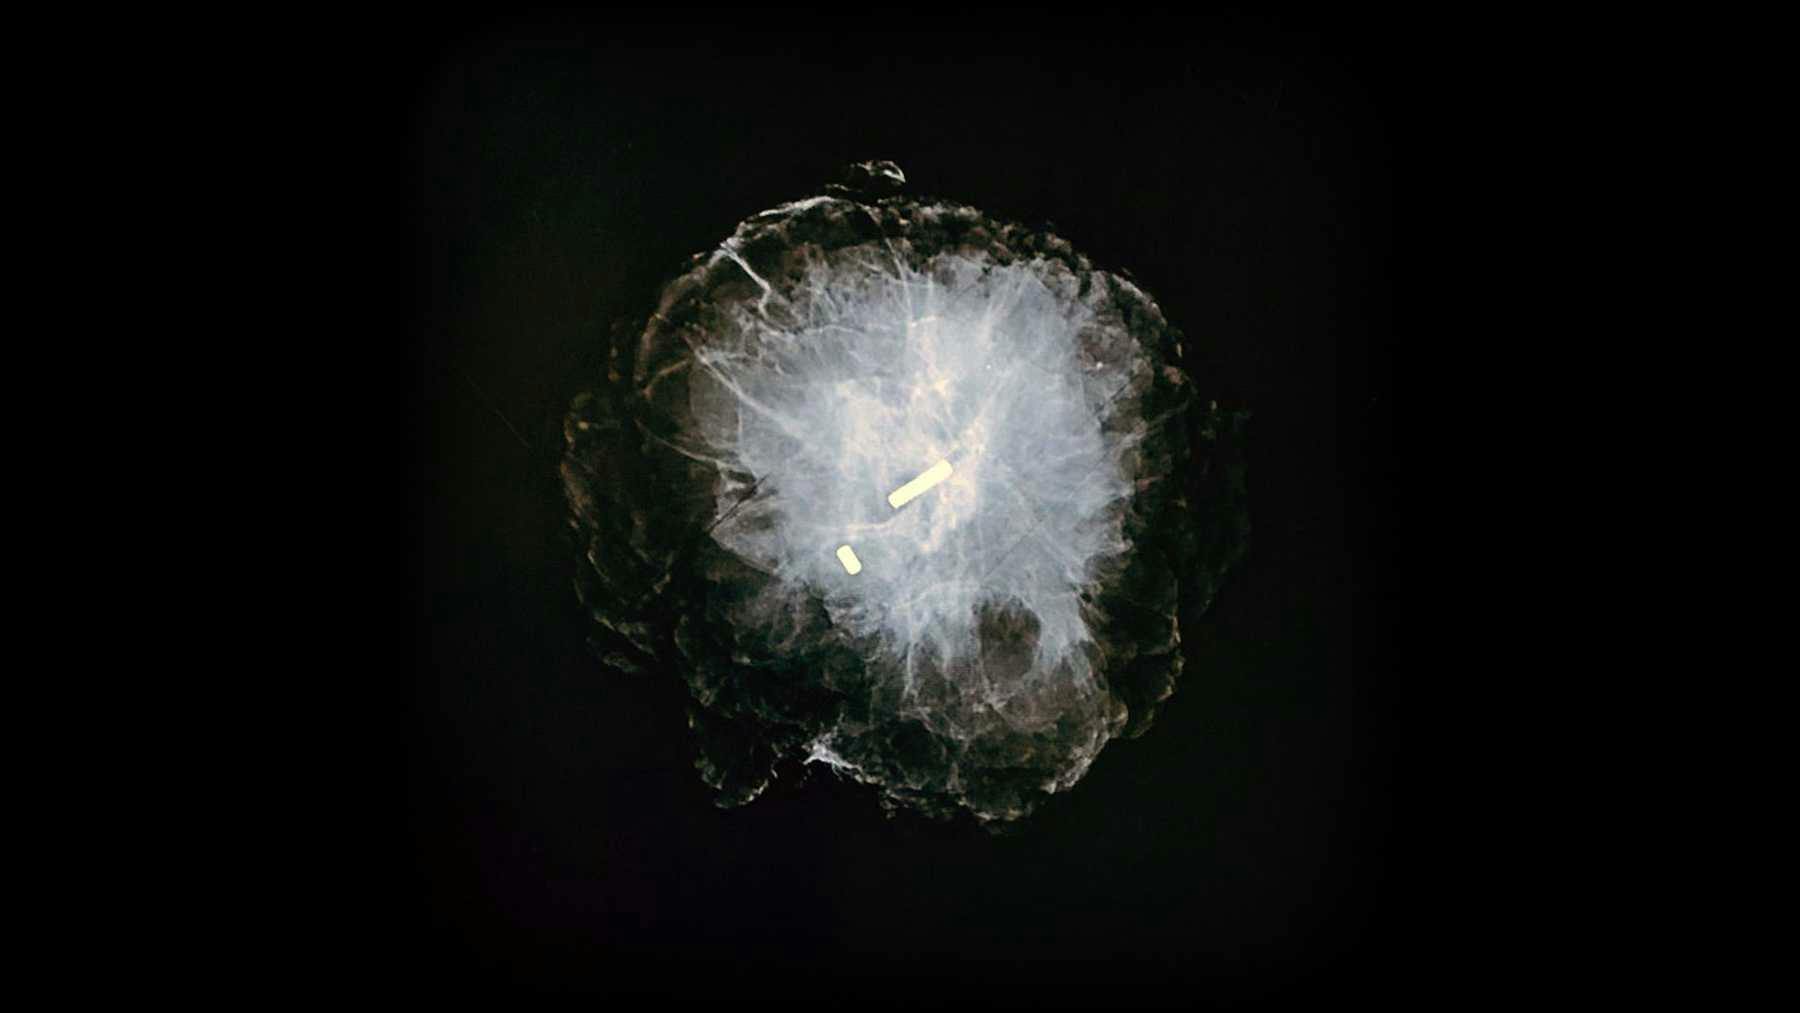 Magseed and clip under imaging